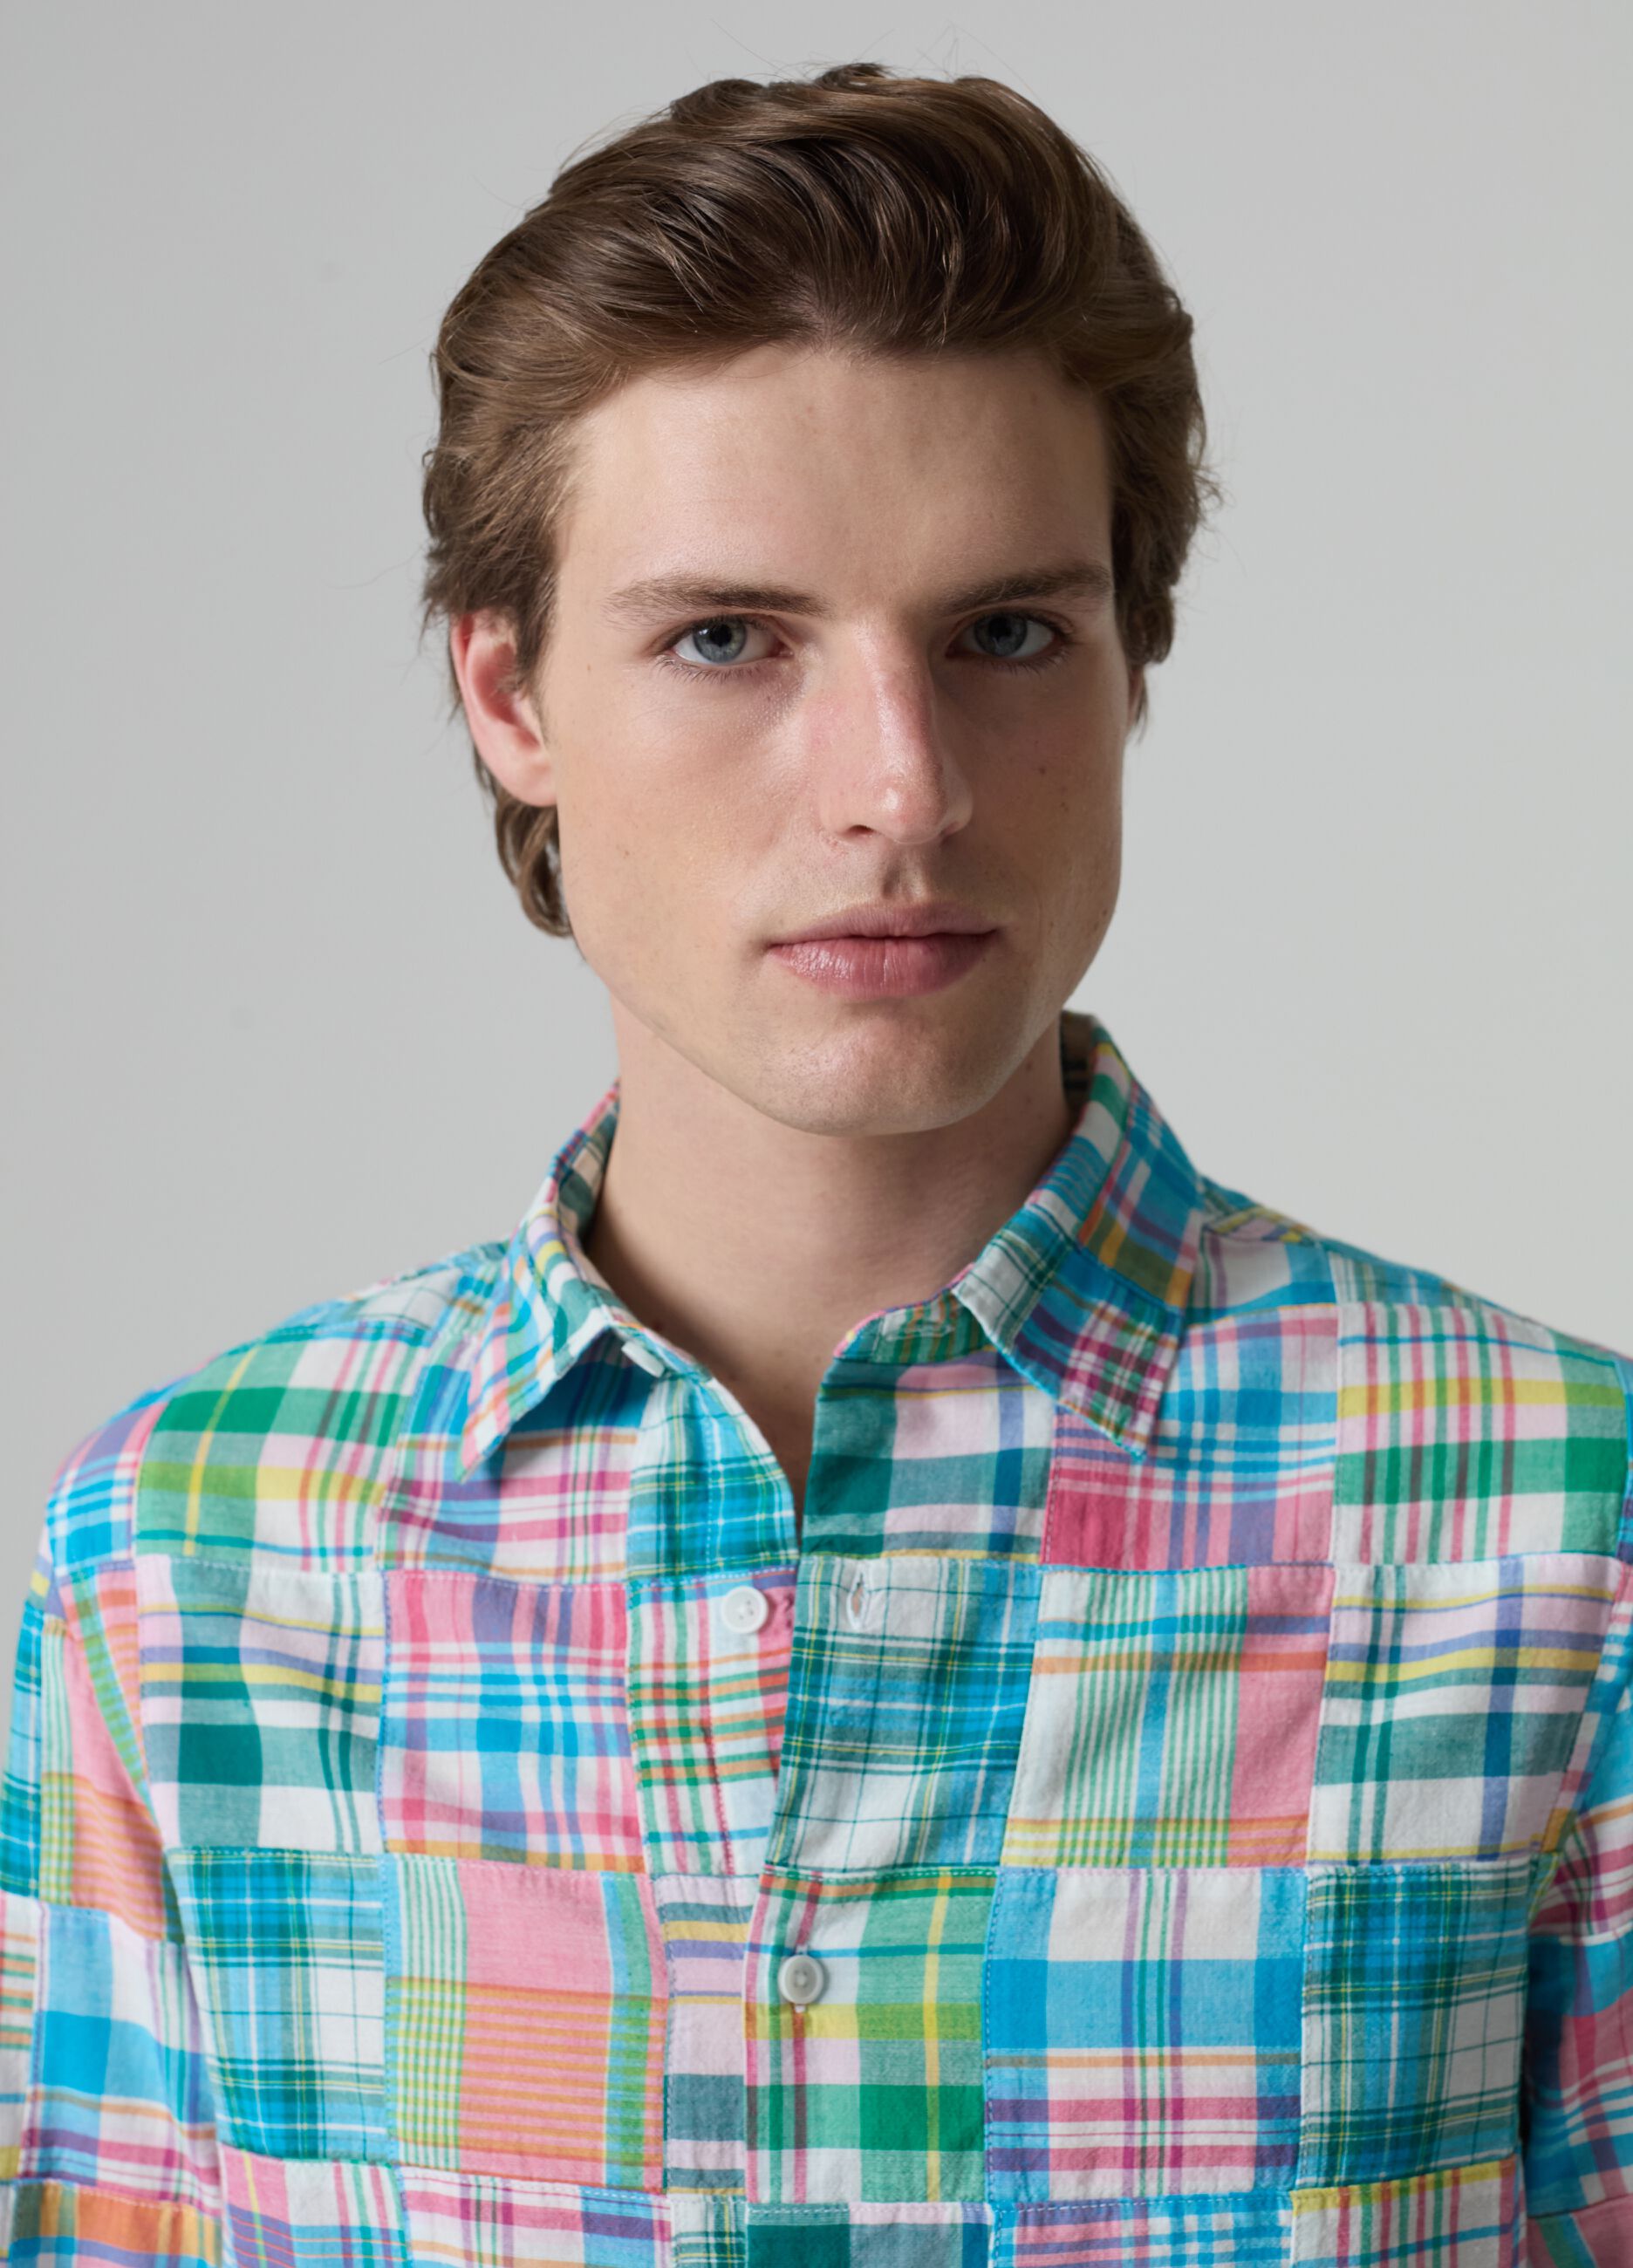 Cotton shirt with check pattern